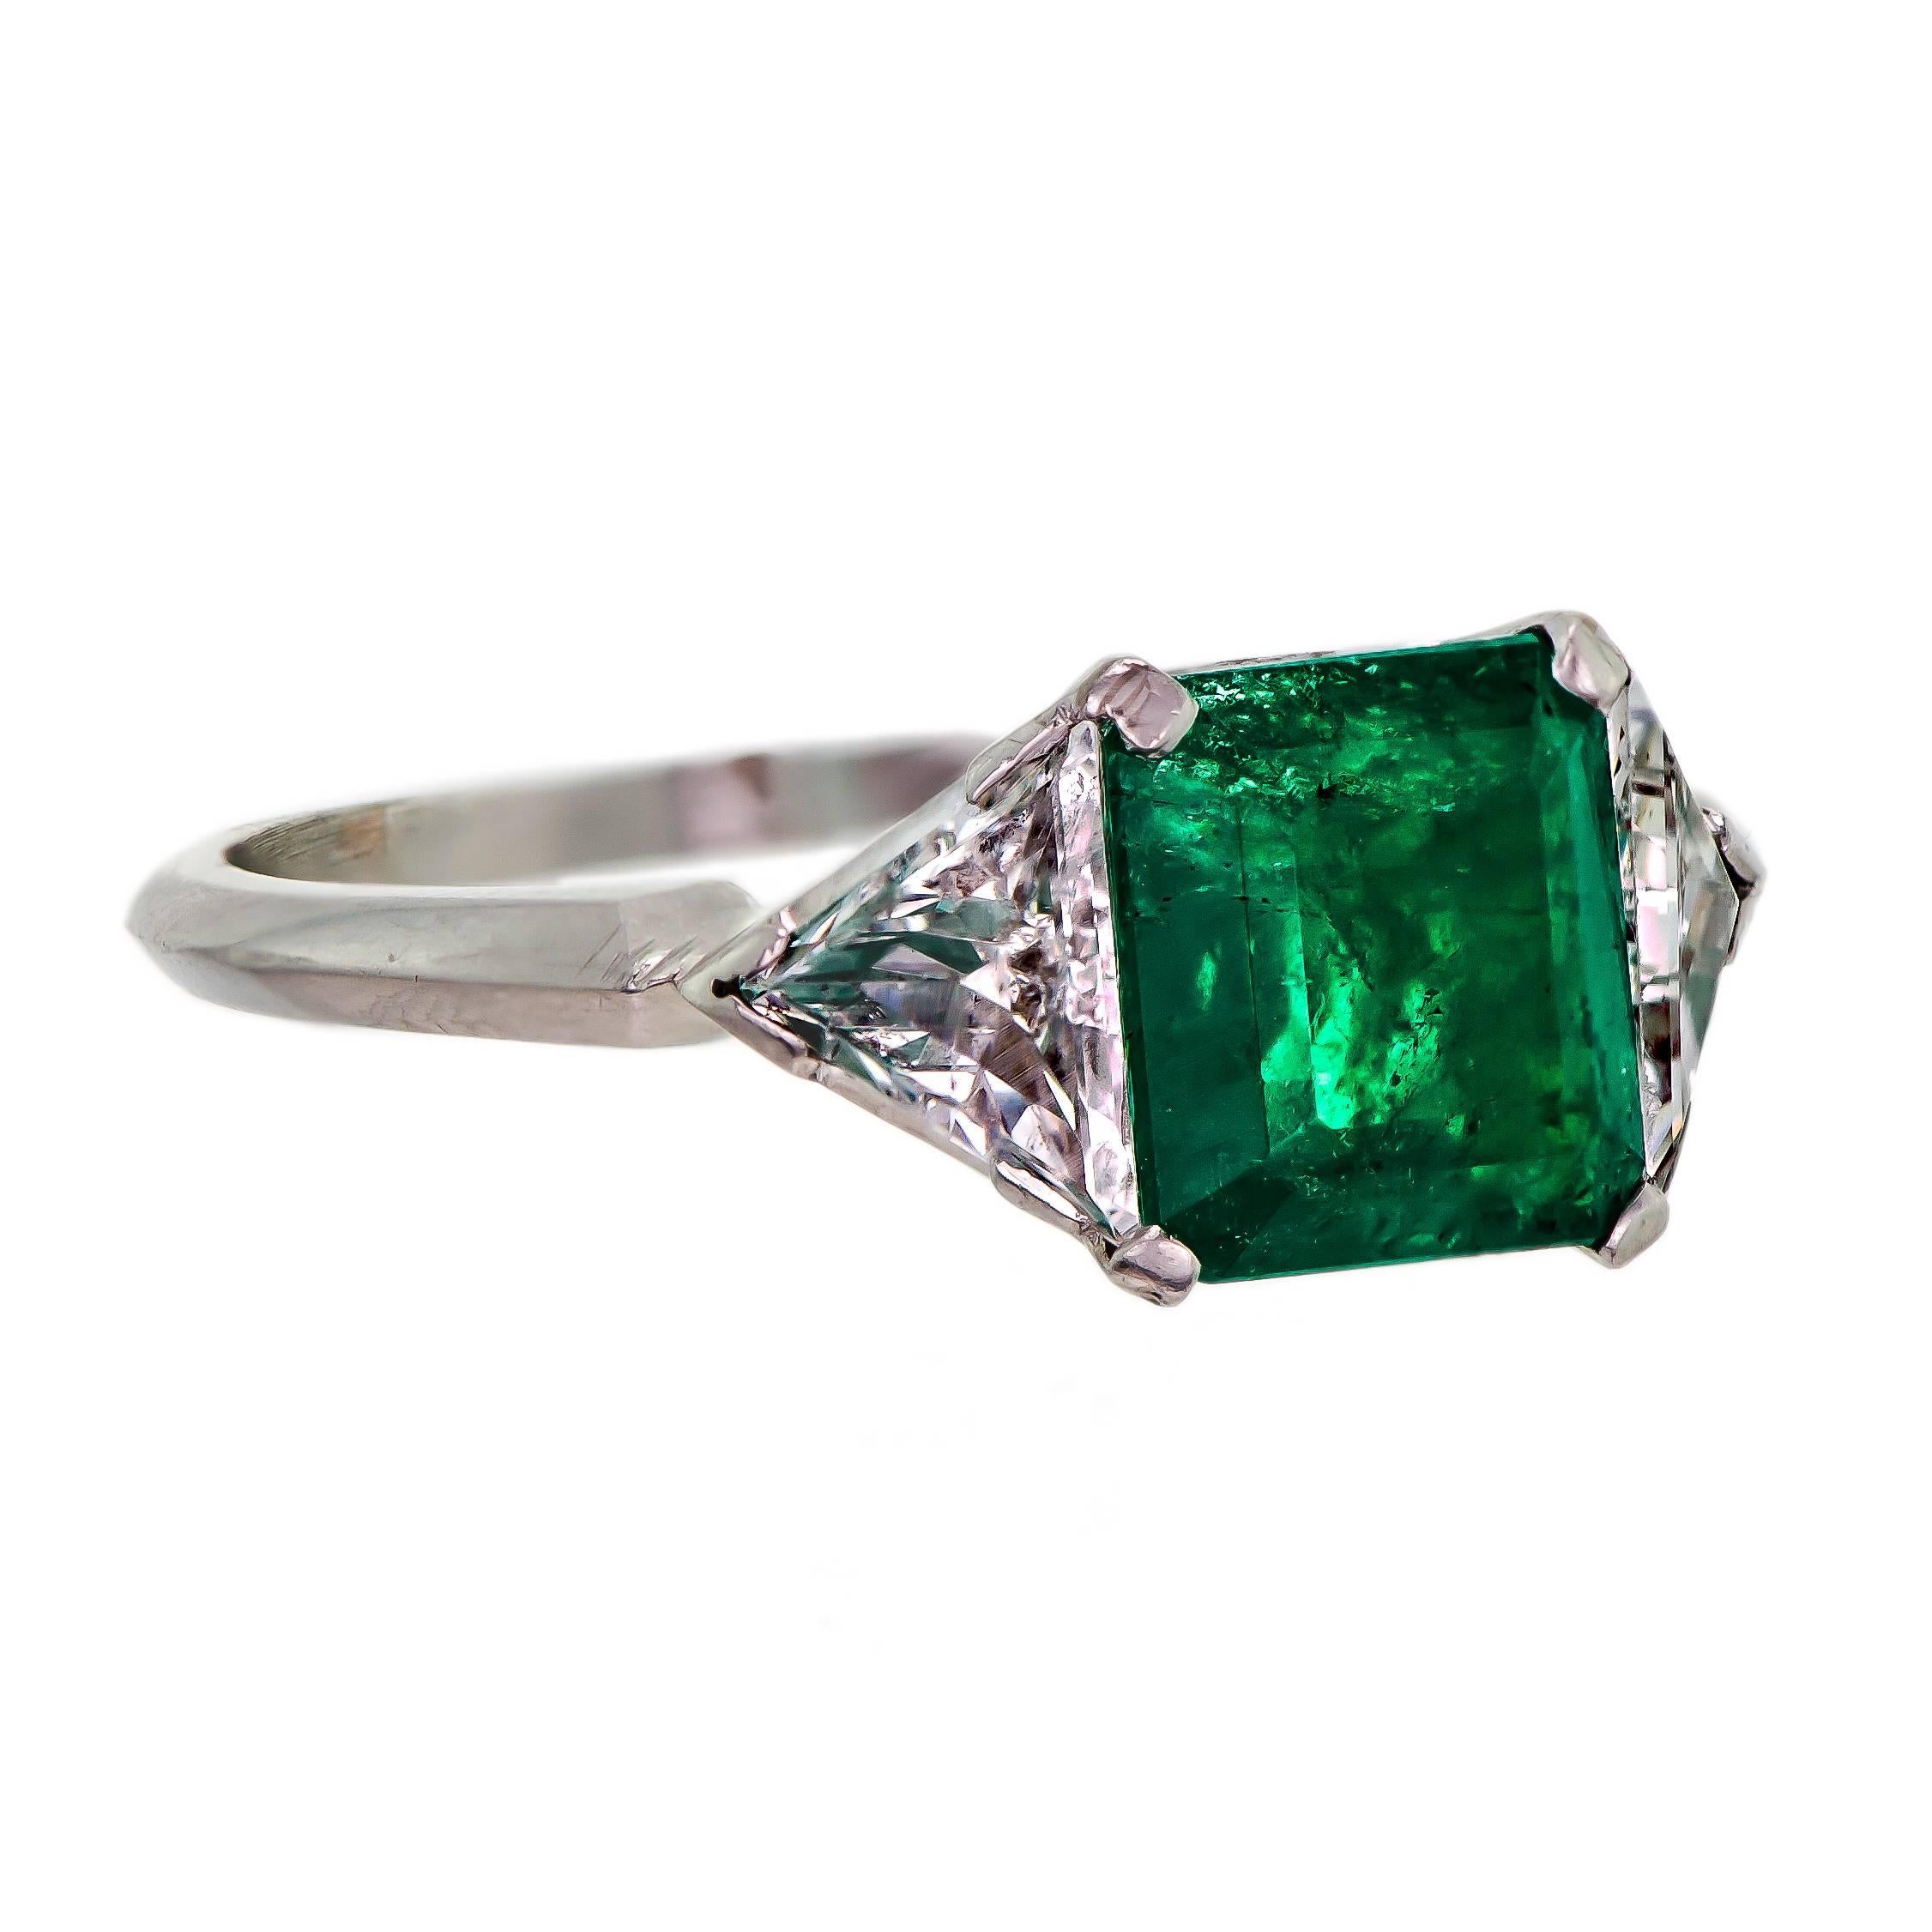 Circa 1930 platinum emerald diamond ring set with one (1) emerald cut emerald measuring approximately 7.9mm length by 7.1mm width and weighing approximately 1.0 ct as measured in the mount further accented by two (2) triangular cut diamonds